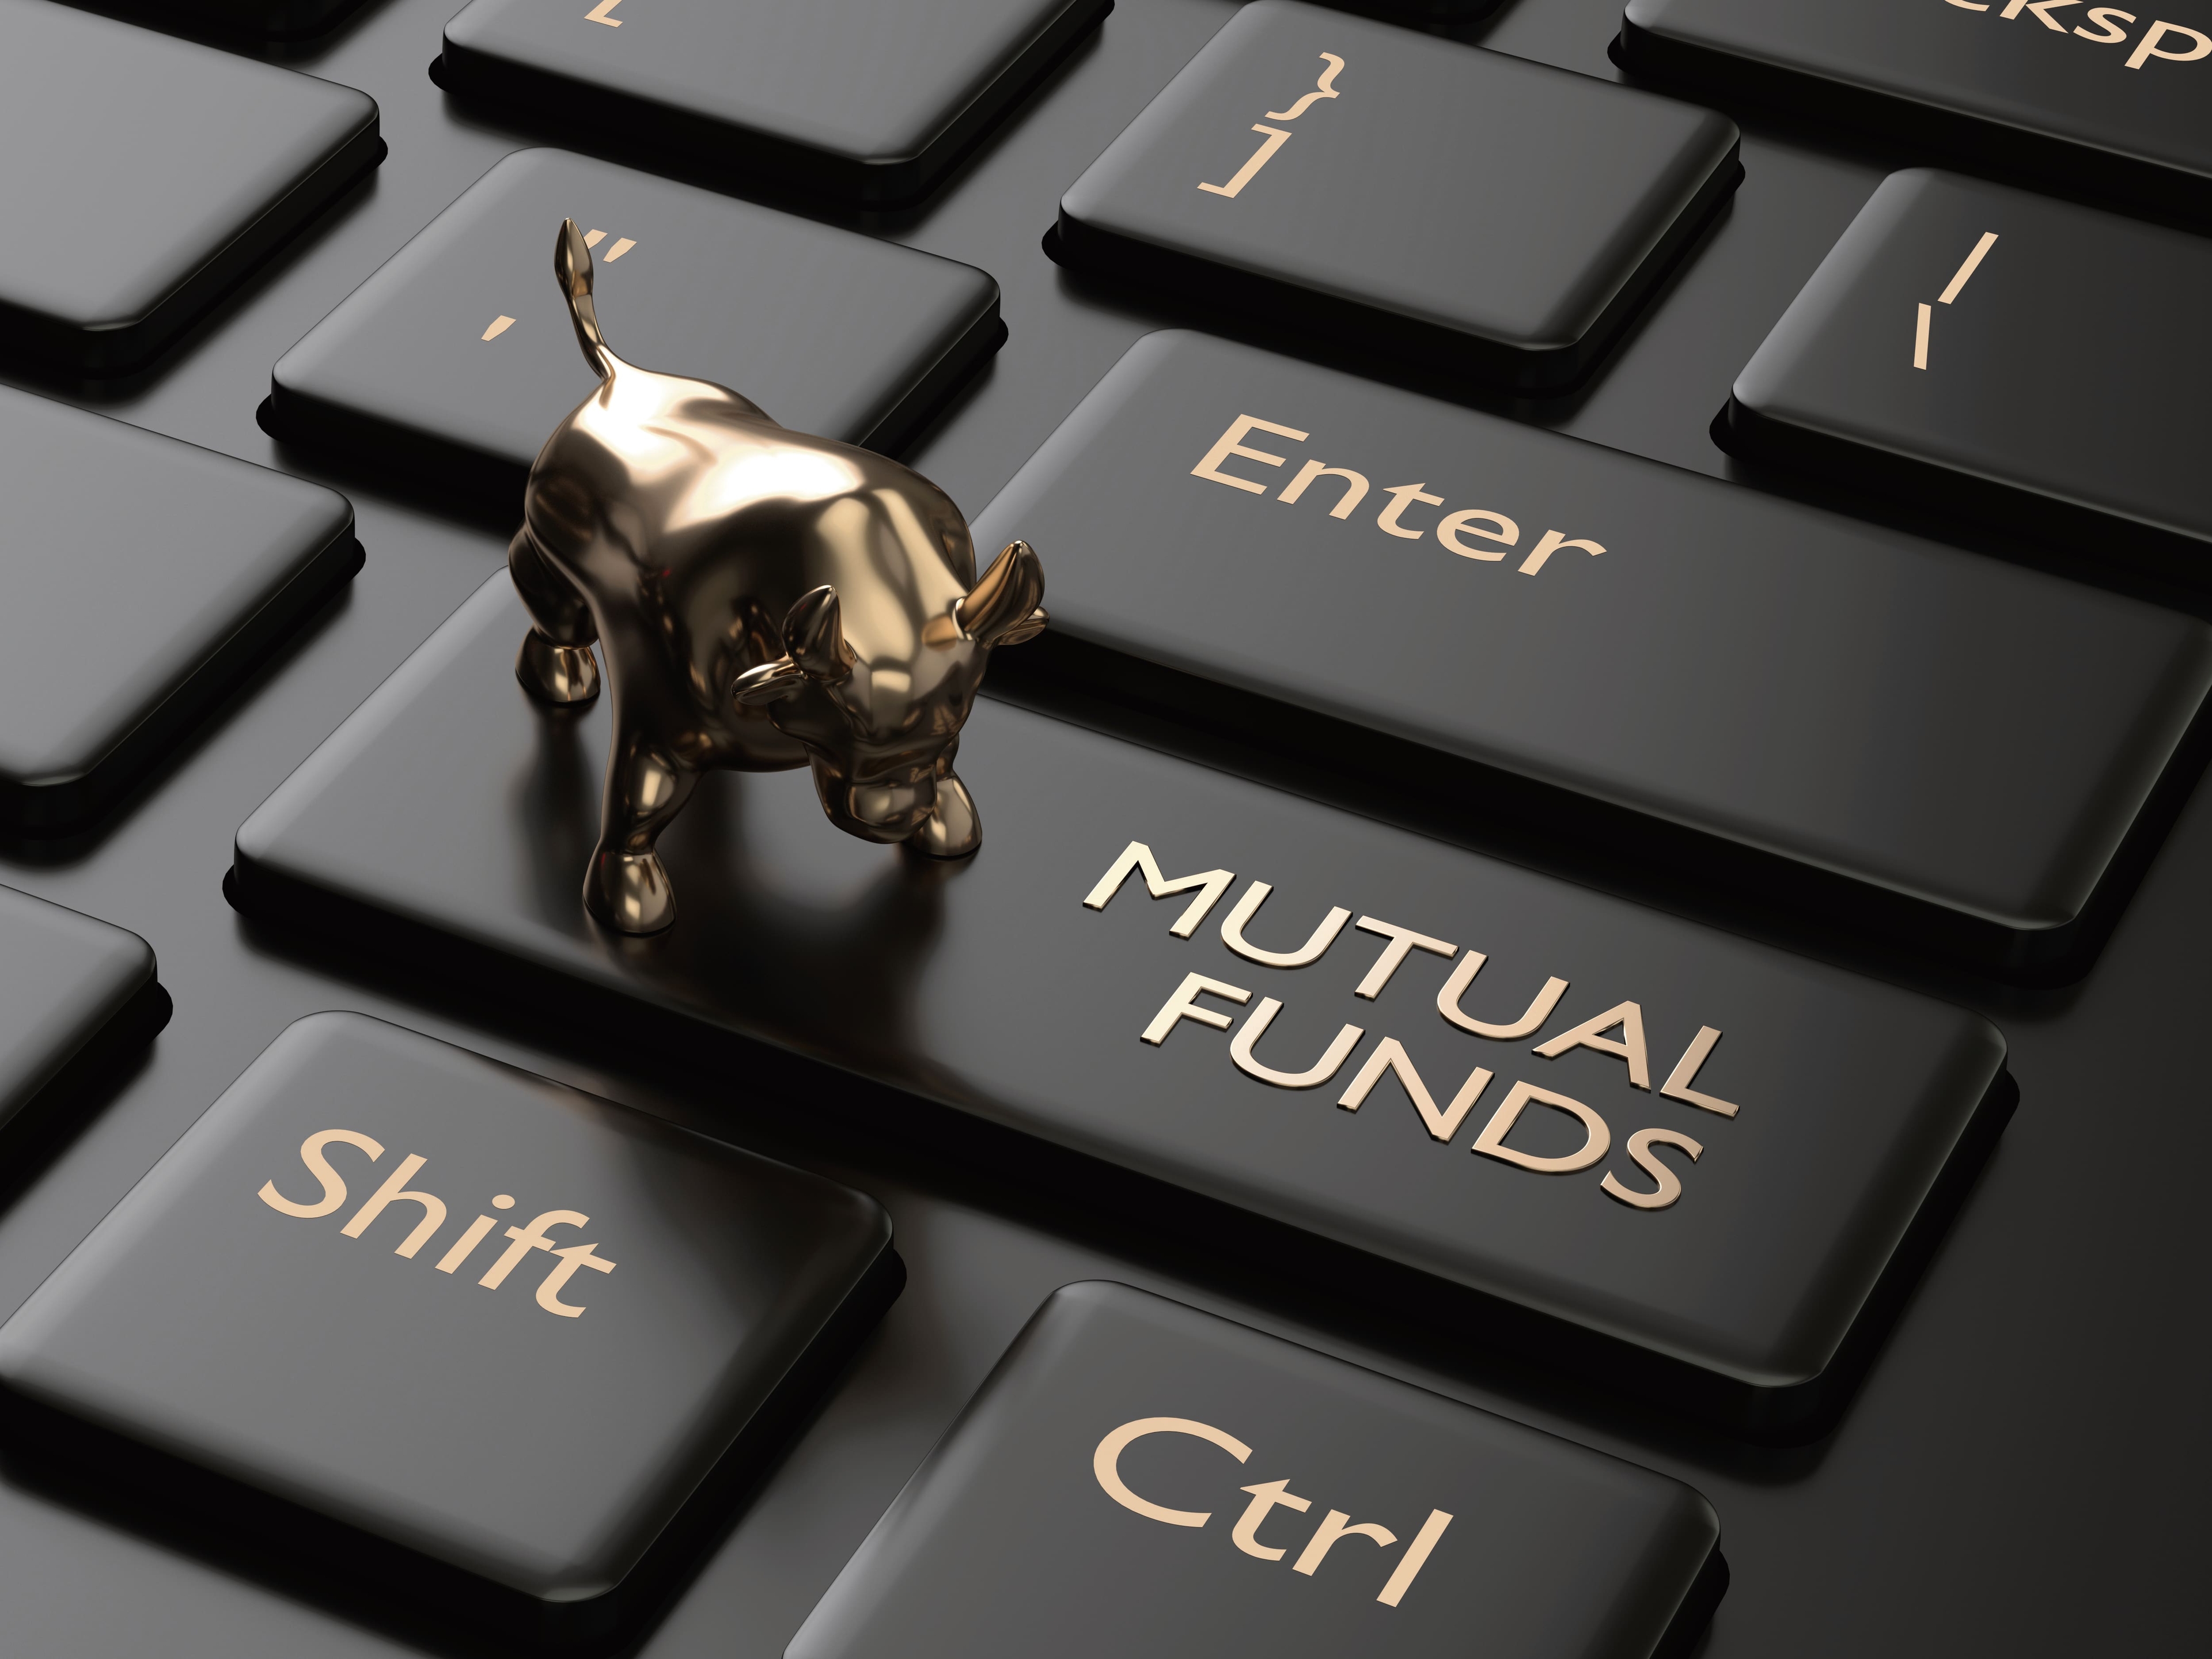 Benefiting from mutual fund investments.